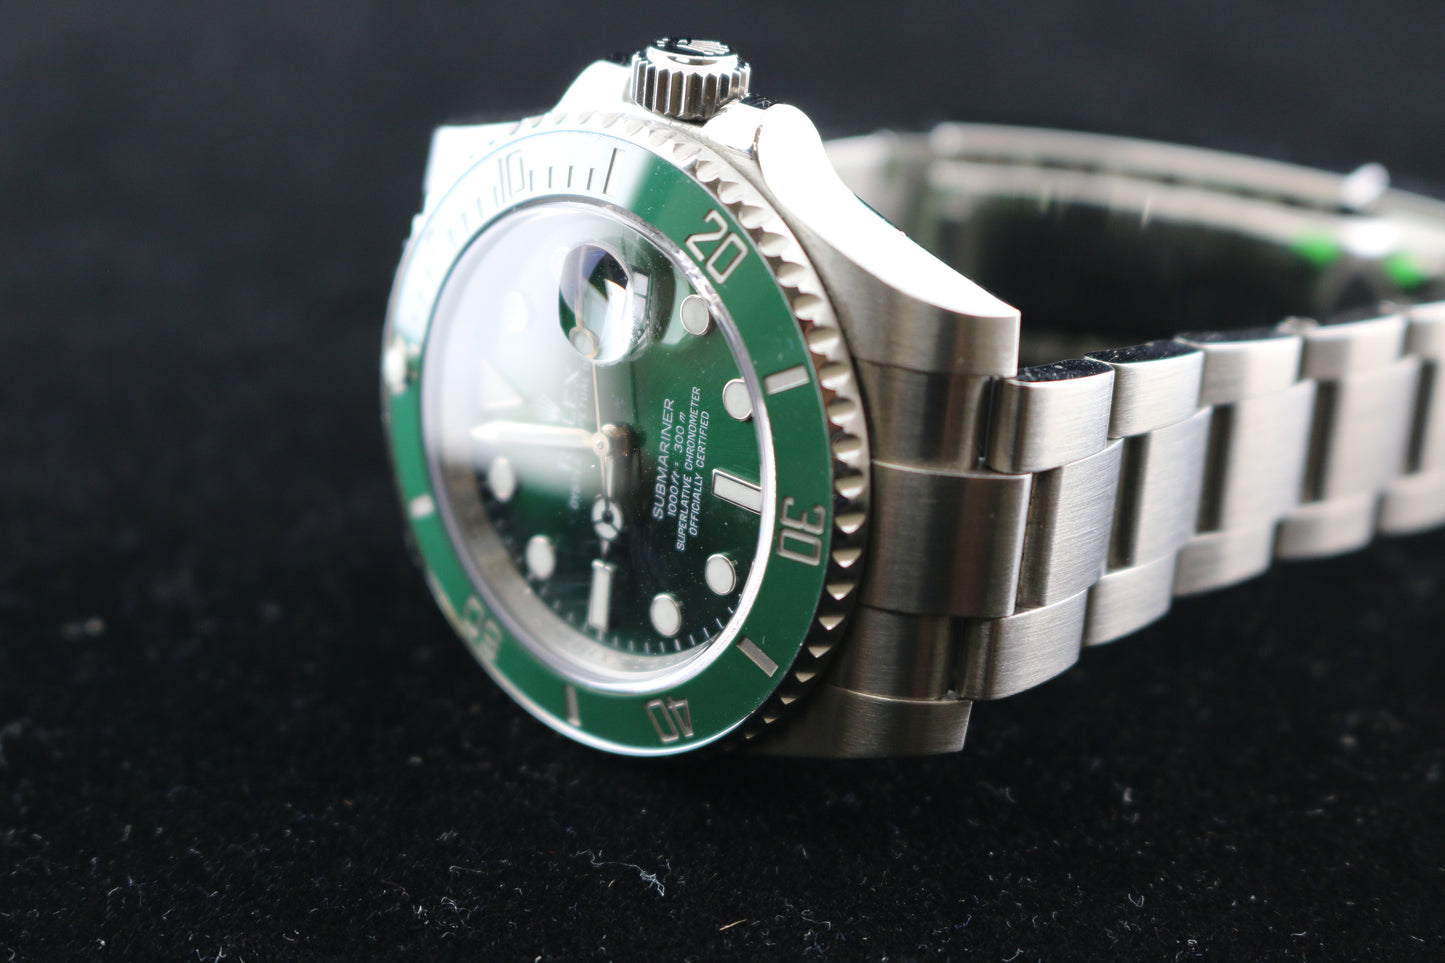 2013 Rolex Submariner 116610LV Hulk Green Dial With Box + Papers 40mm